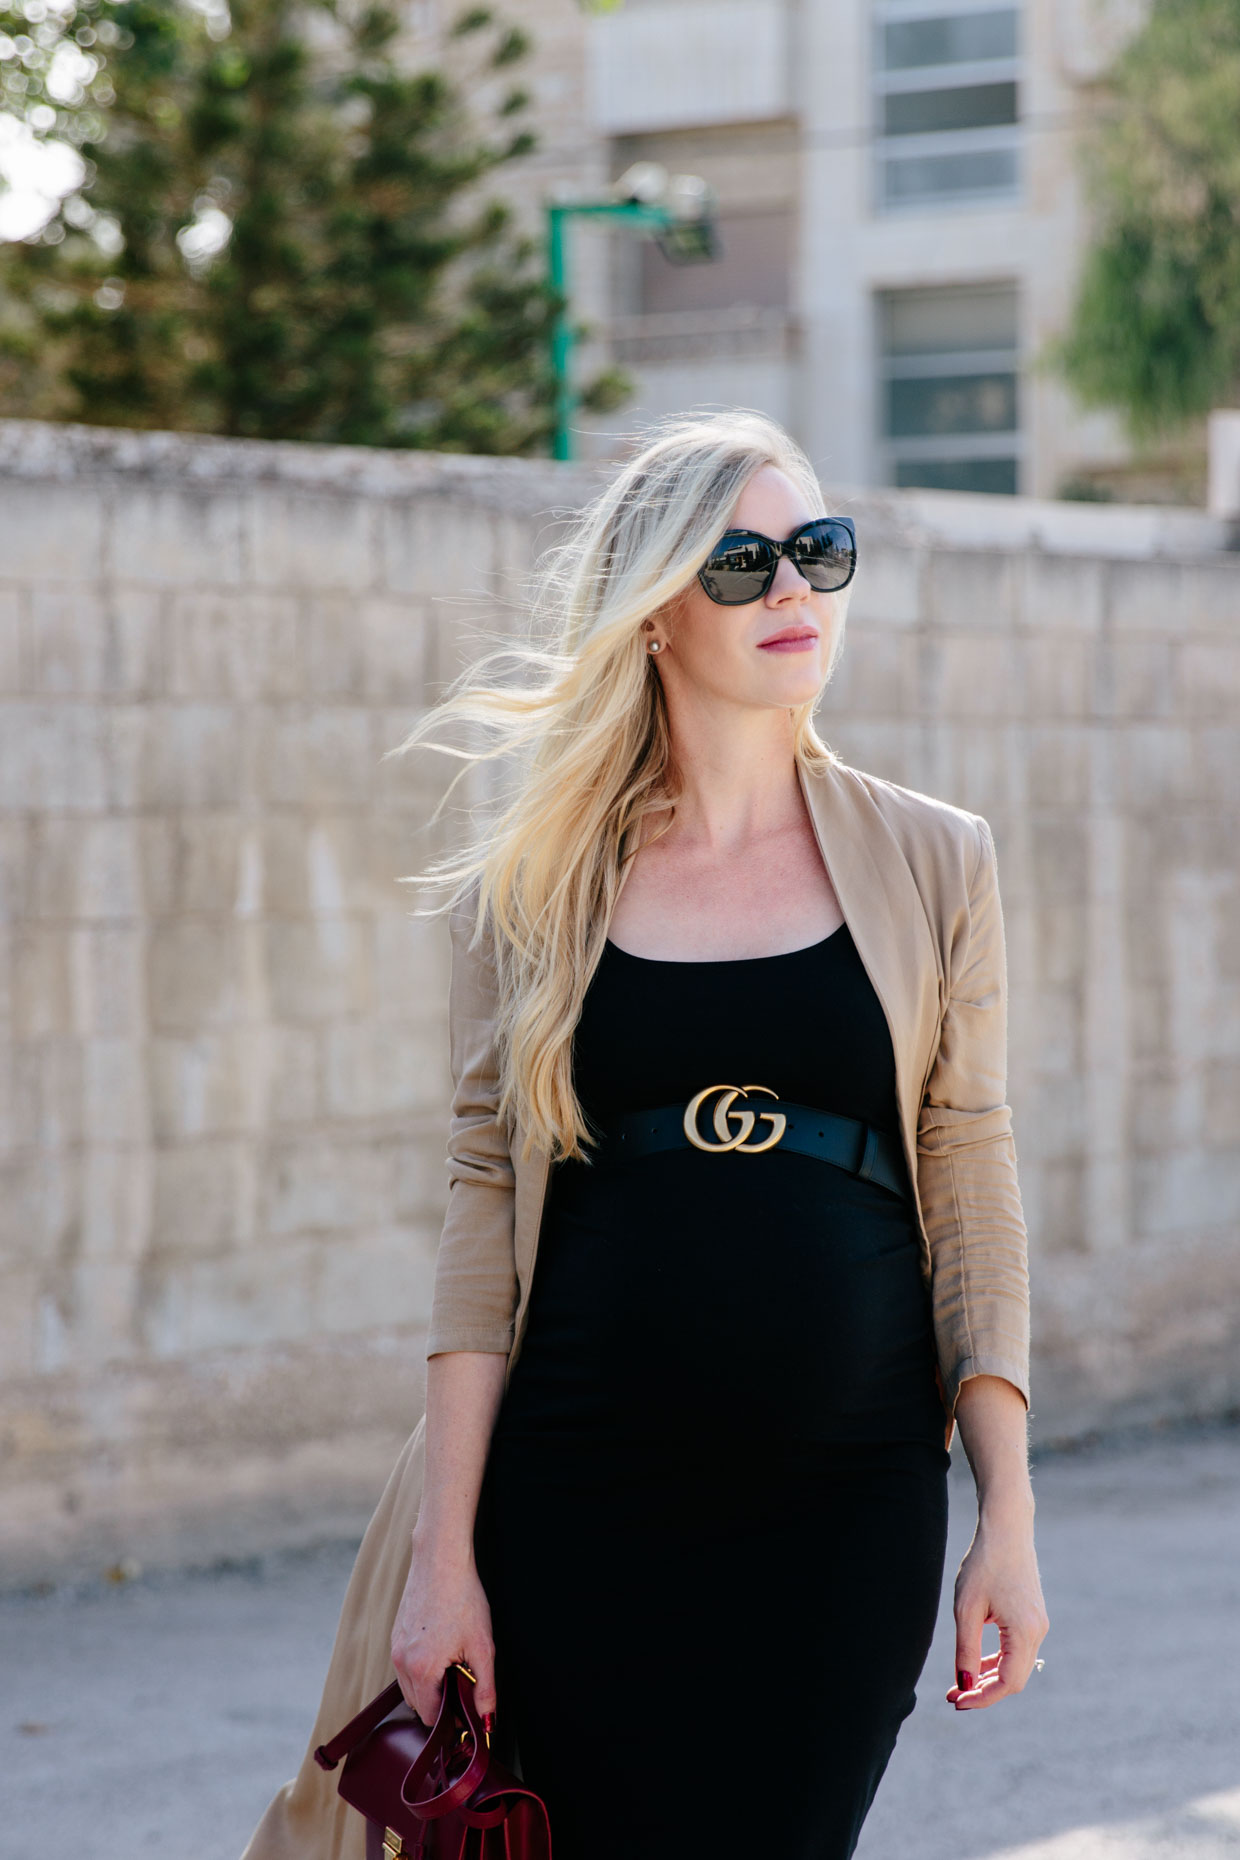 Gucci Belt Maternity Outfit Ideas for All Seasons - Meagan's Moda